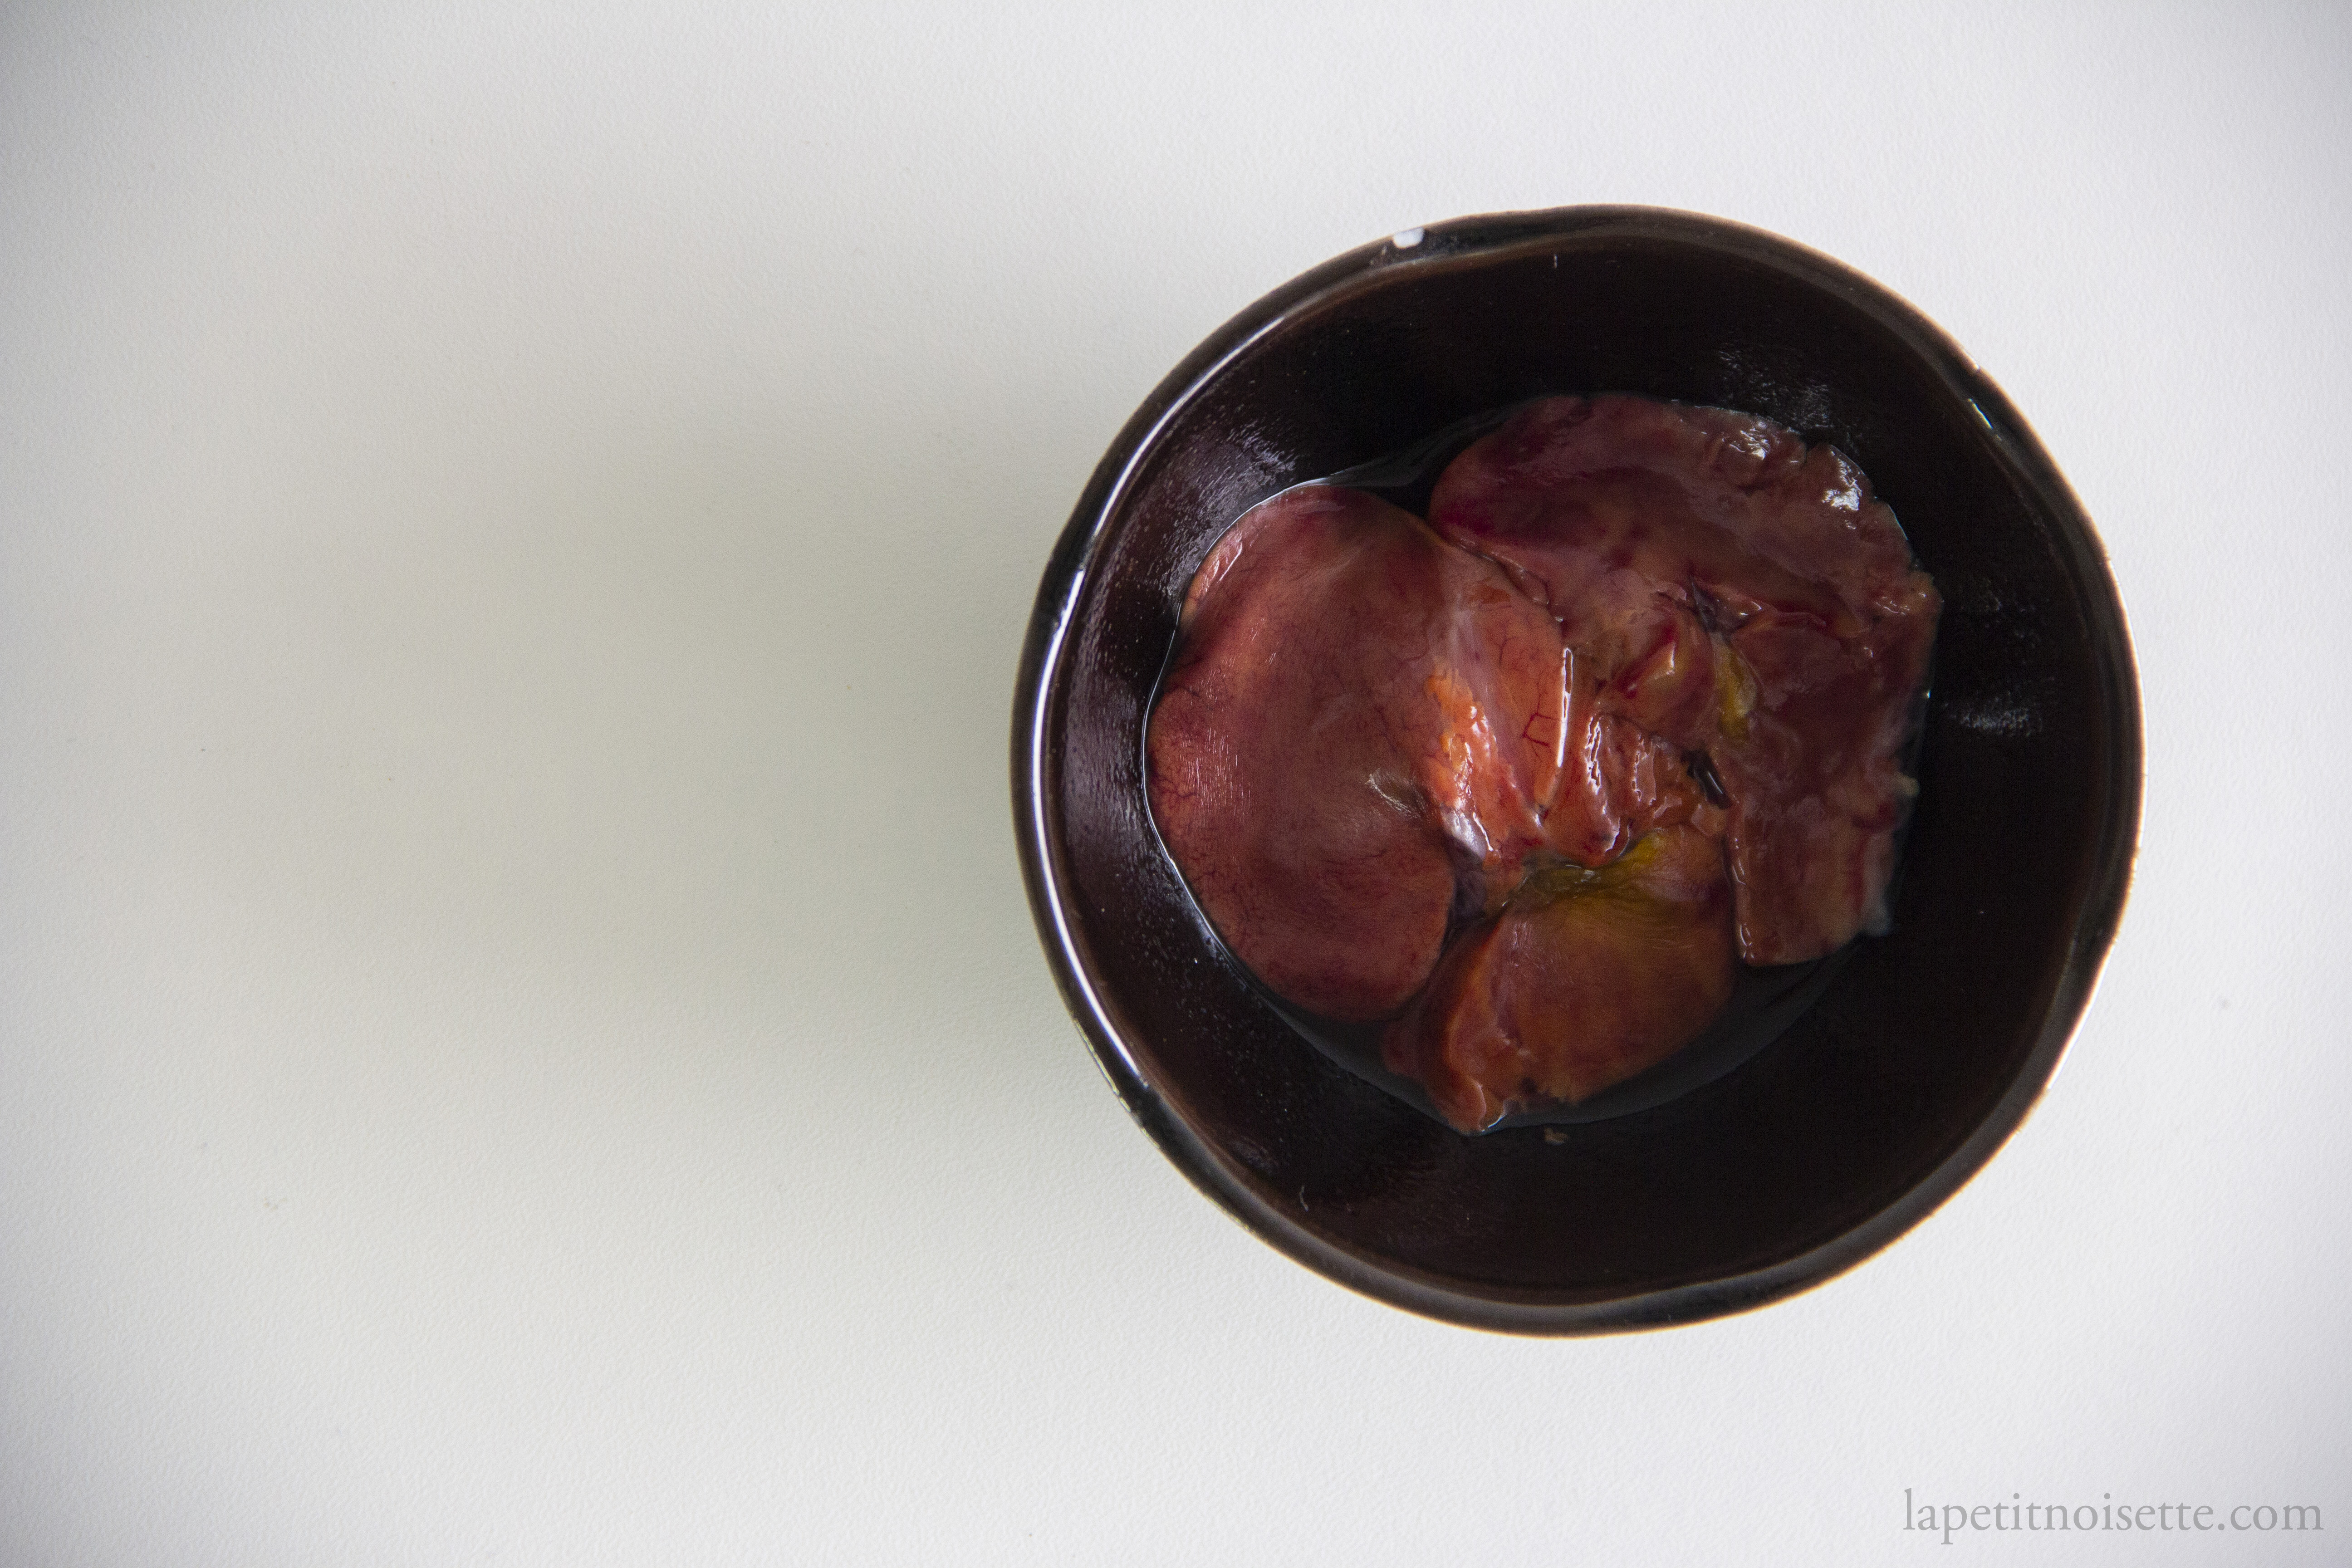 The liver of Japanese managatsuo.